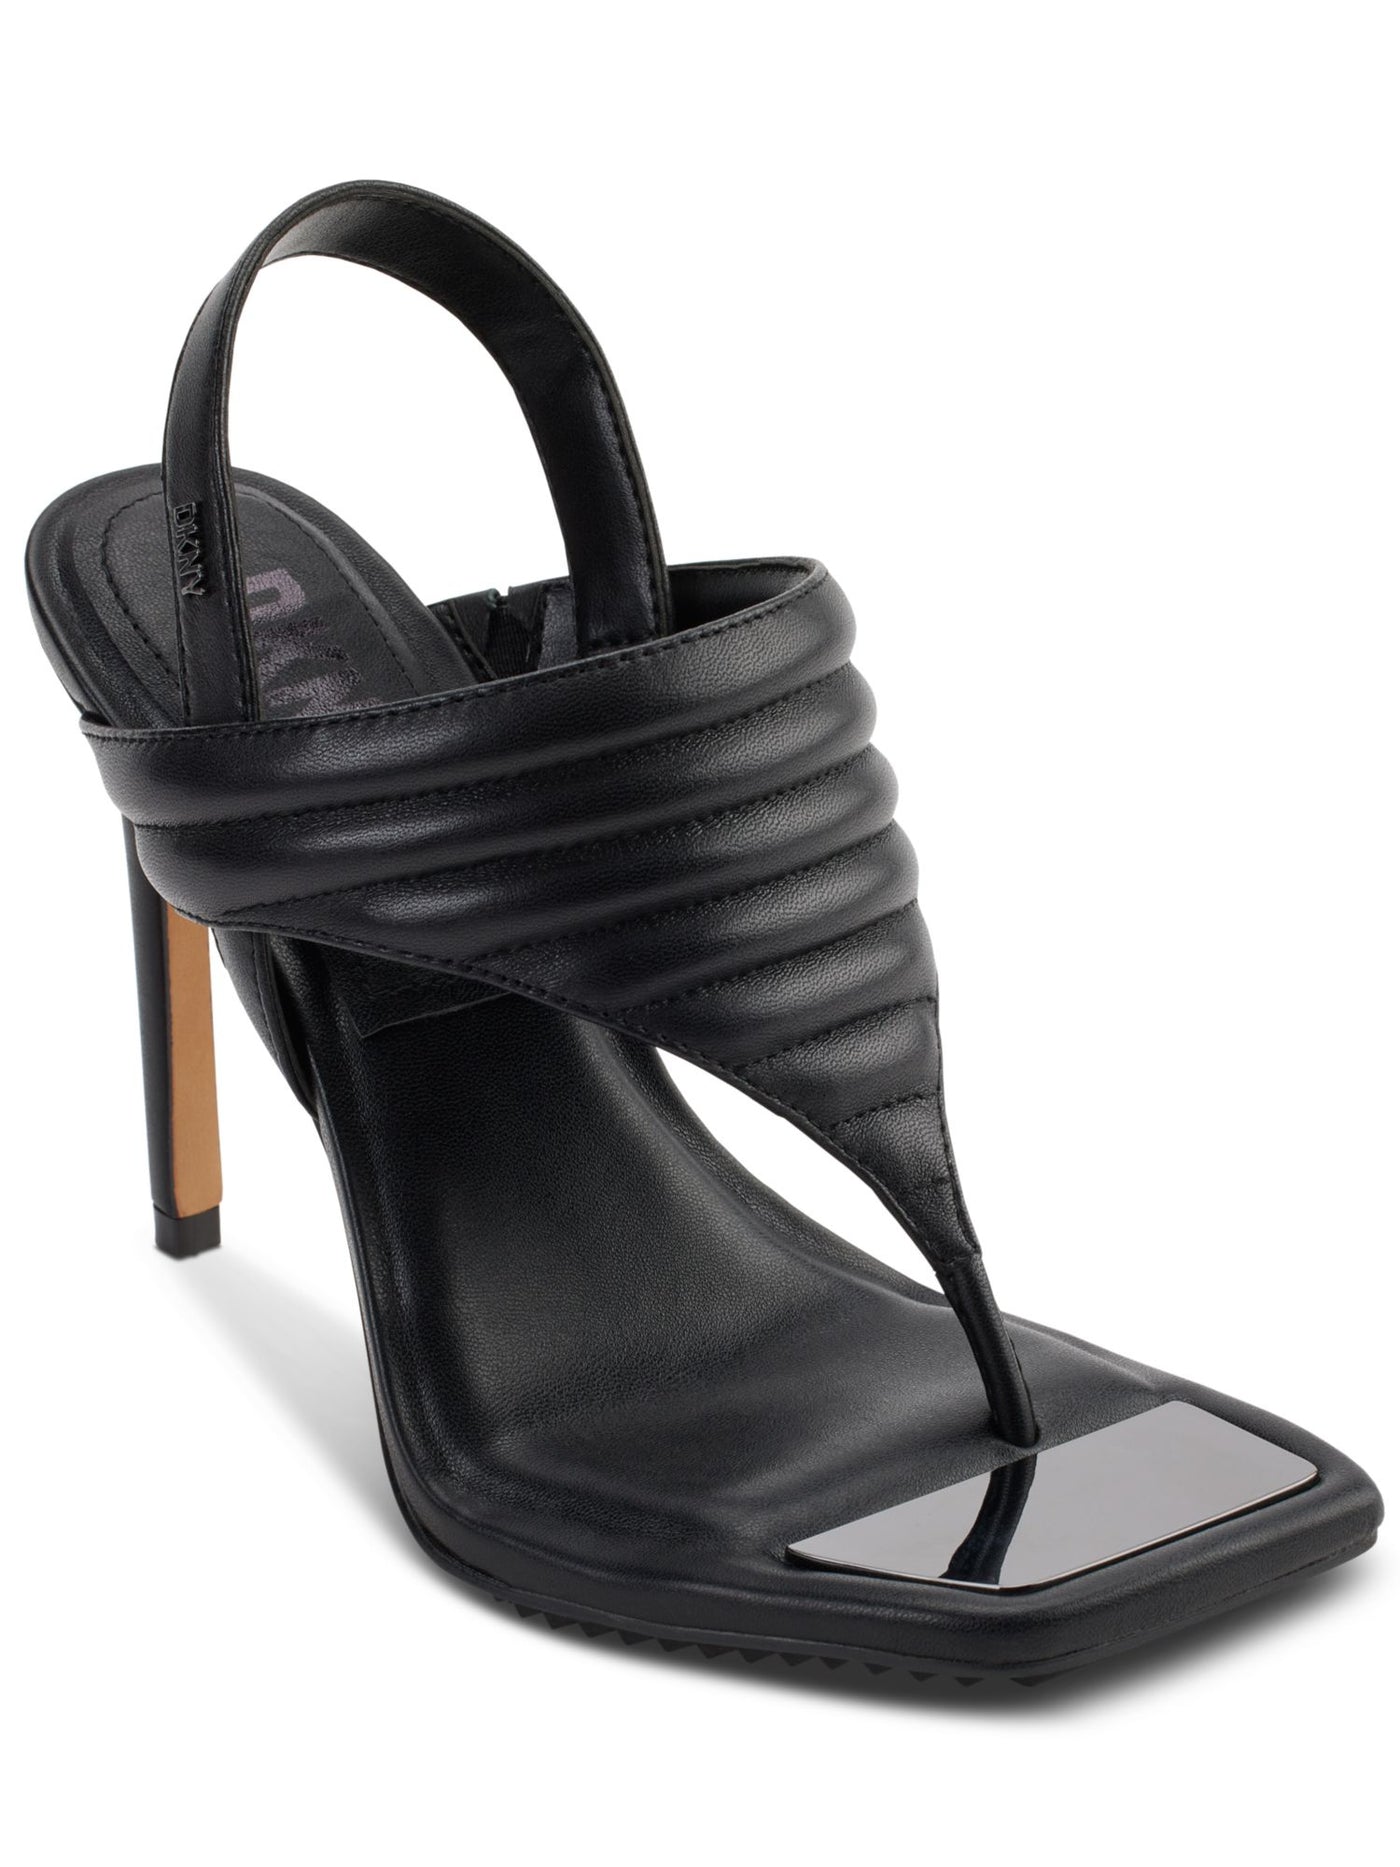 DKNY Womens Black Quilted Cushioned Ranae Square Toe Stiletto Slip On Leather Dress Slingback Sandal 5 M